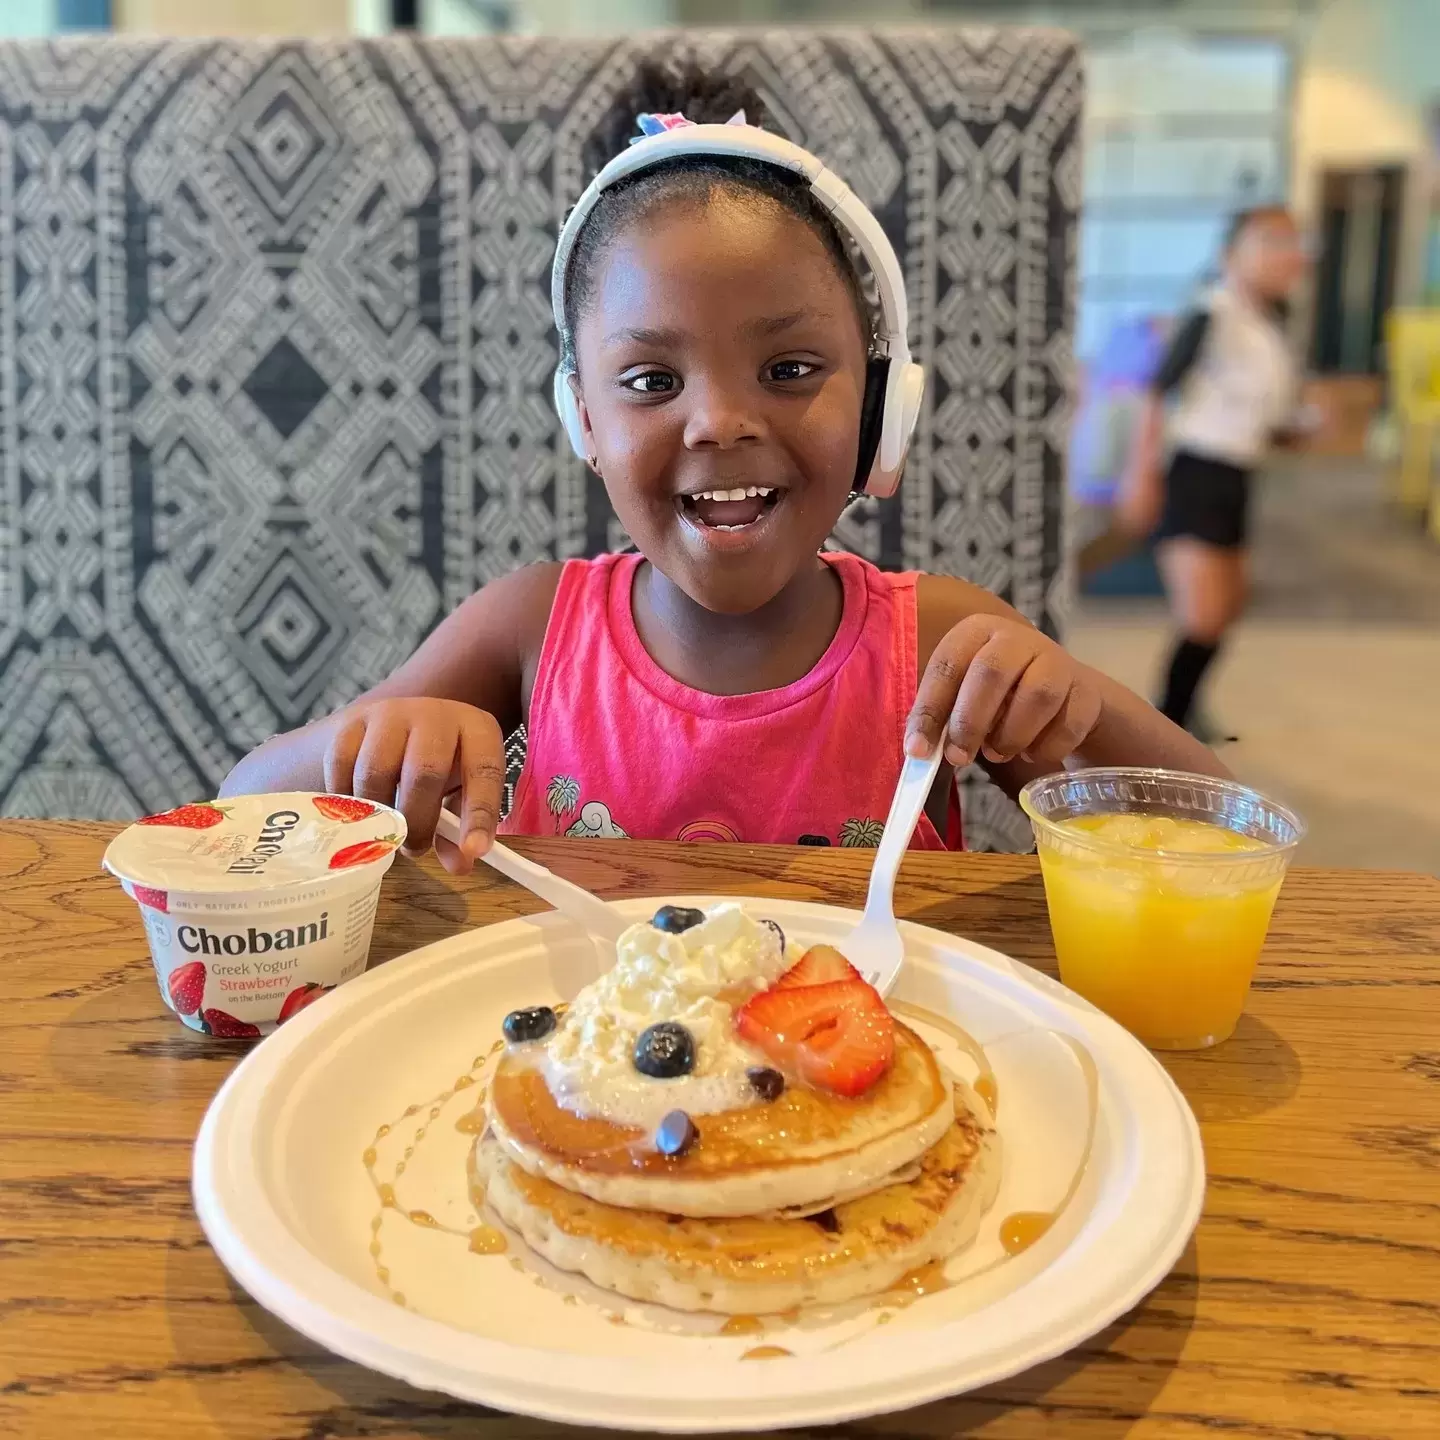 The second Saturday of the month means Pancake Breakfast! 😍
Thank you for joining us this Morning! 🥞
.
.
.
#LivConnected #PancakeBreakfast #LivCrossroads